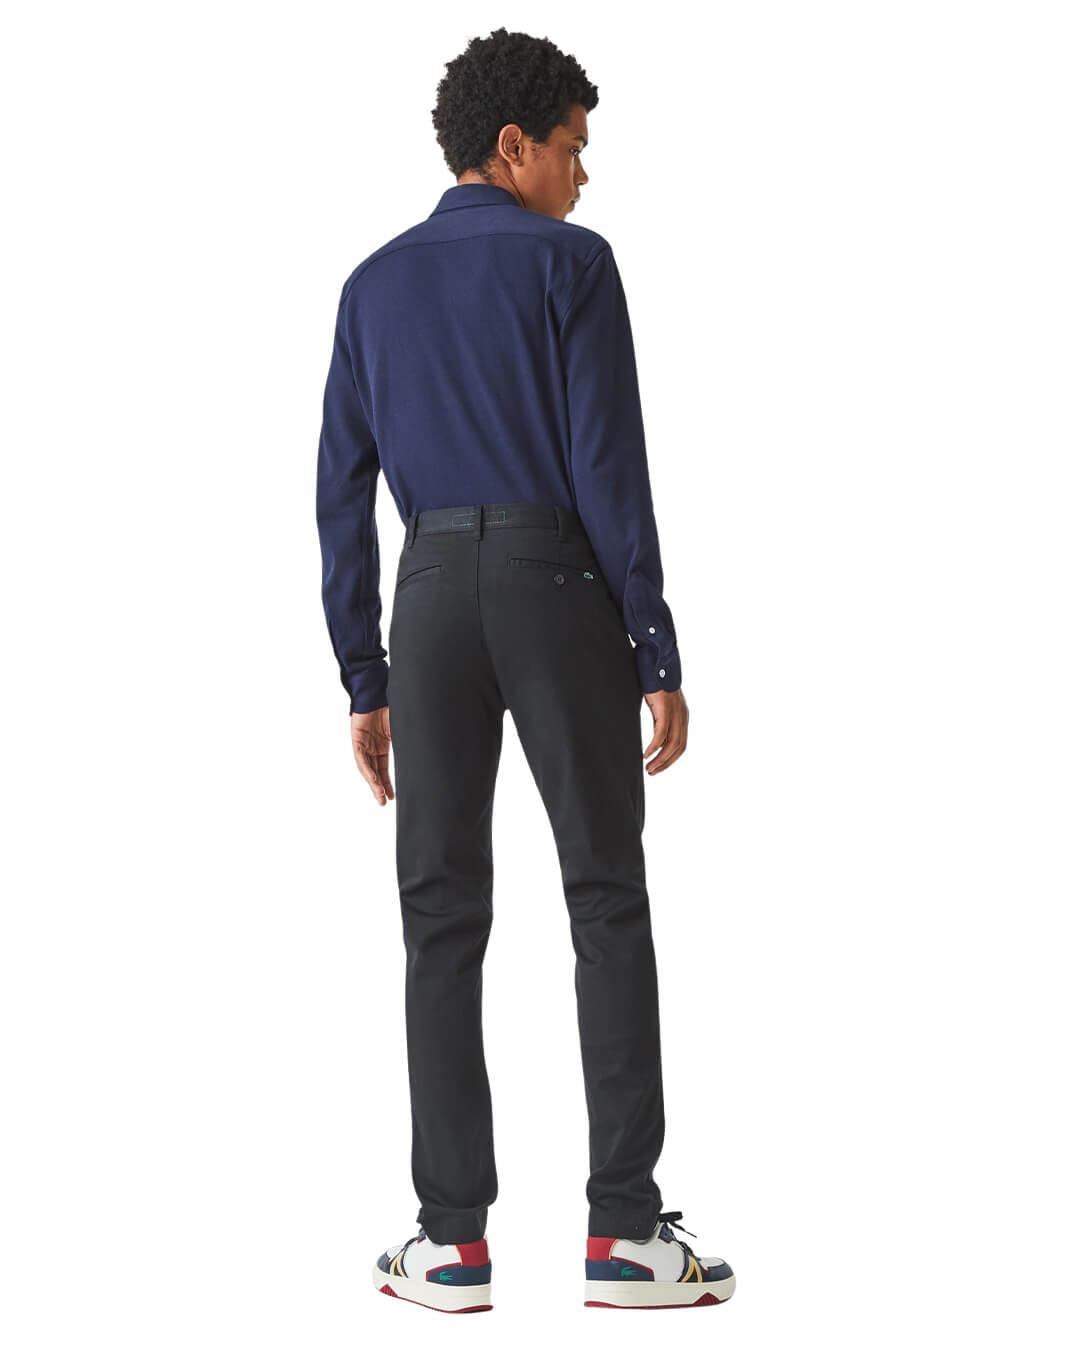 Lacoste Trousers Lacoste New Classic Slim Fit Stretch Black Cotton Trousers